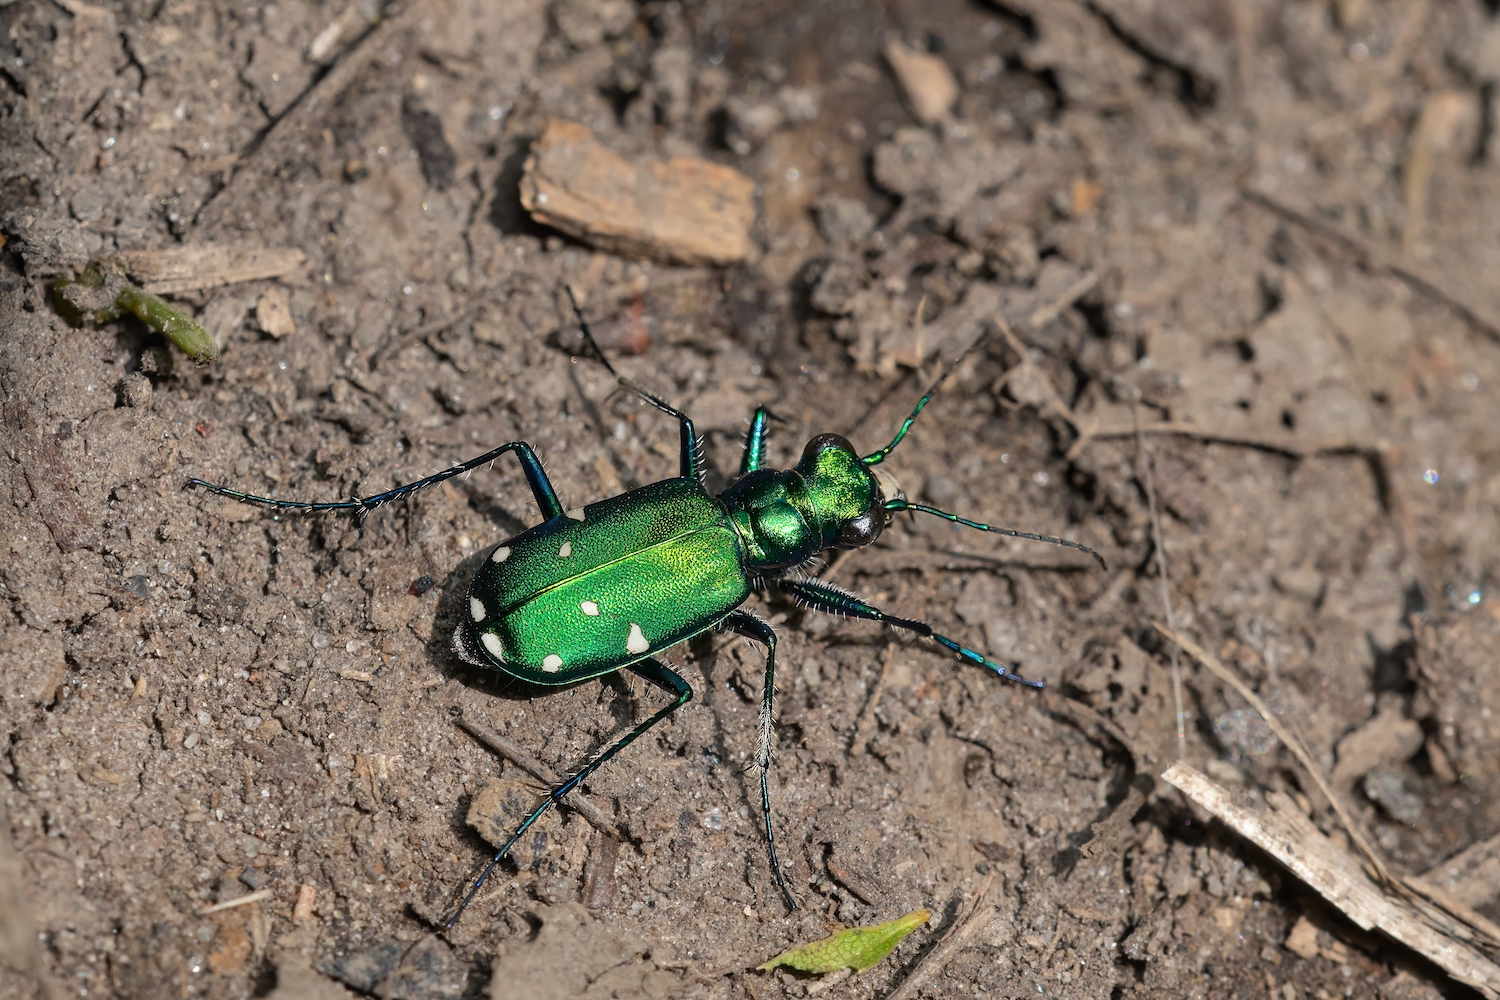 A shiny metallic green six-spotted tiger beetle in the soil.